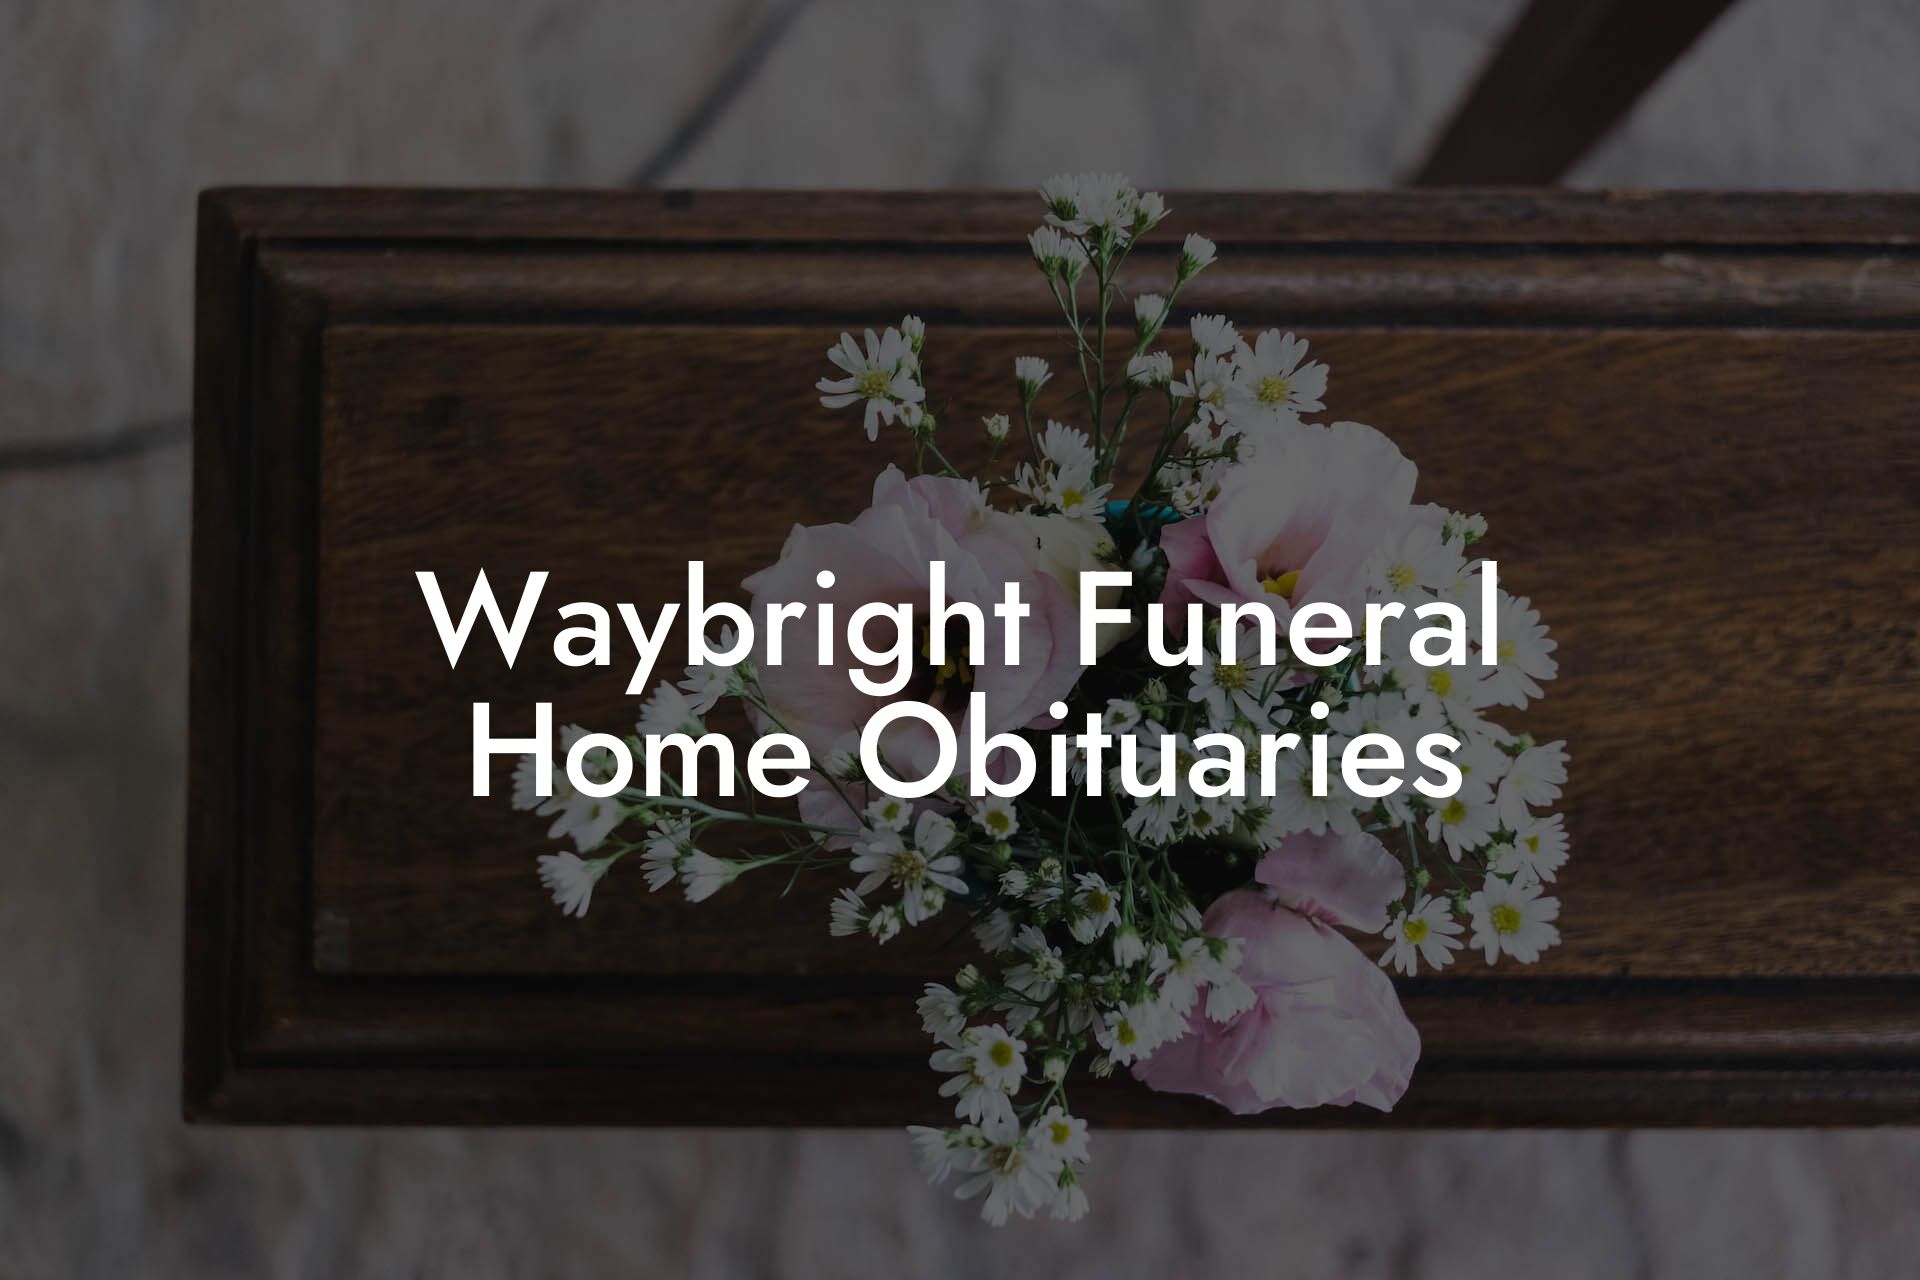 Waybright Funeral Home Obituaries